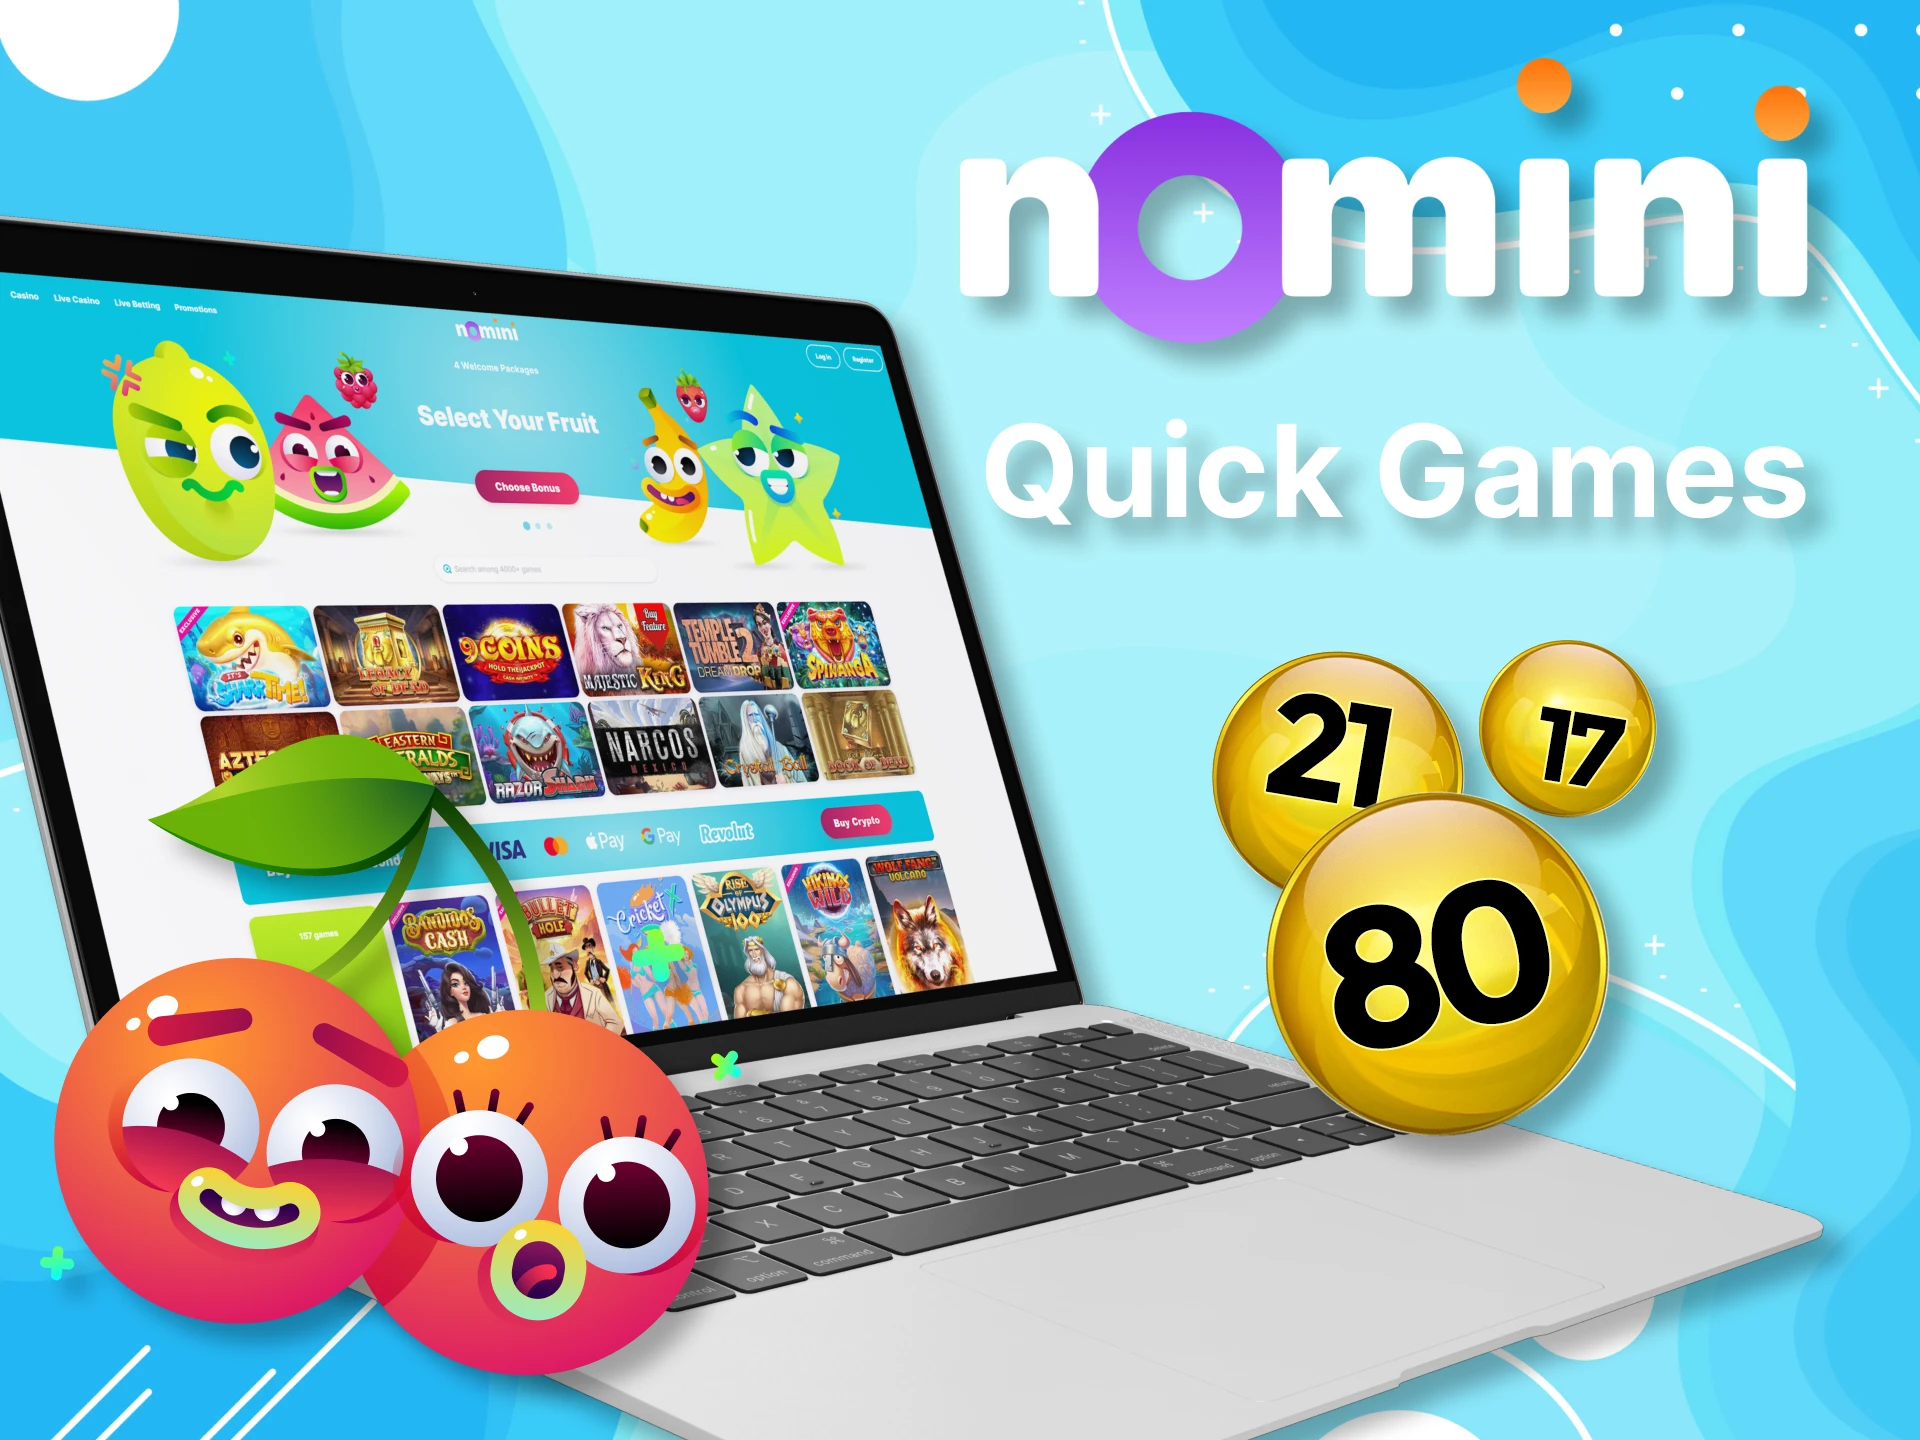 With Nomini, try a variety of quick casino games.